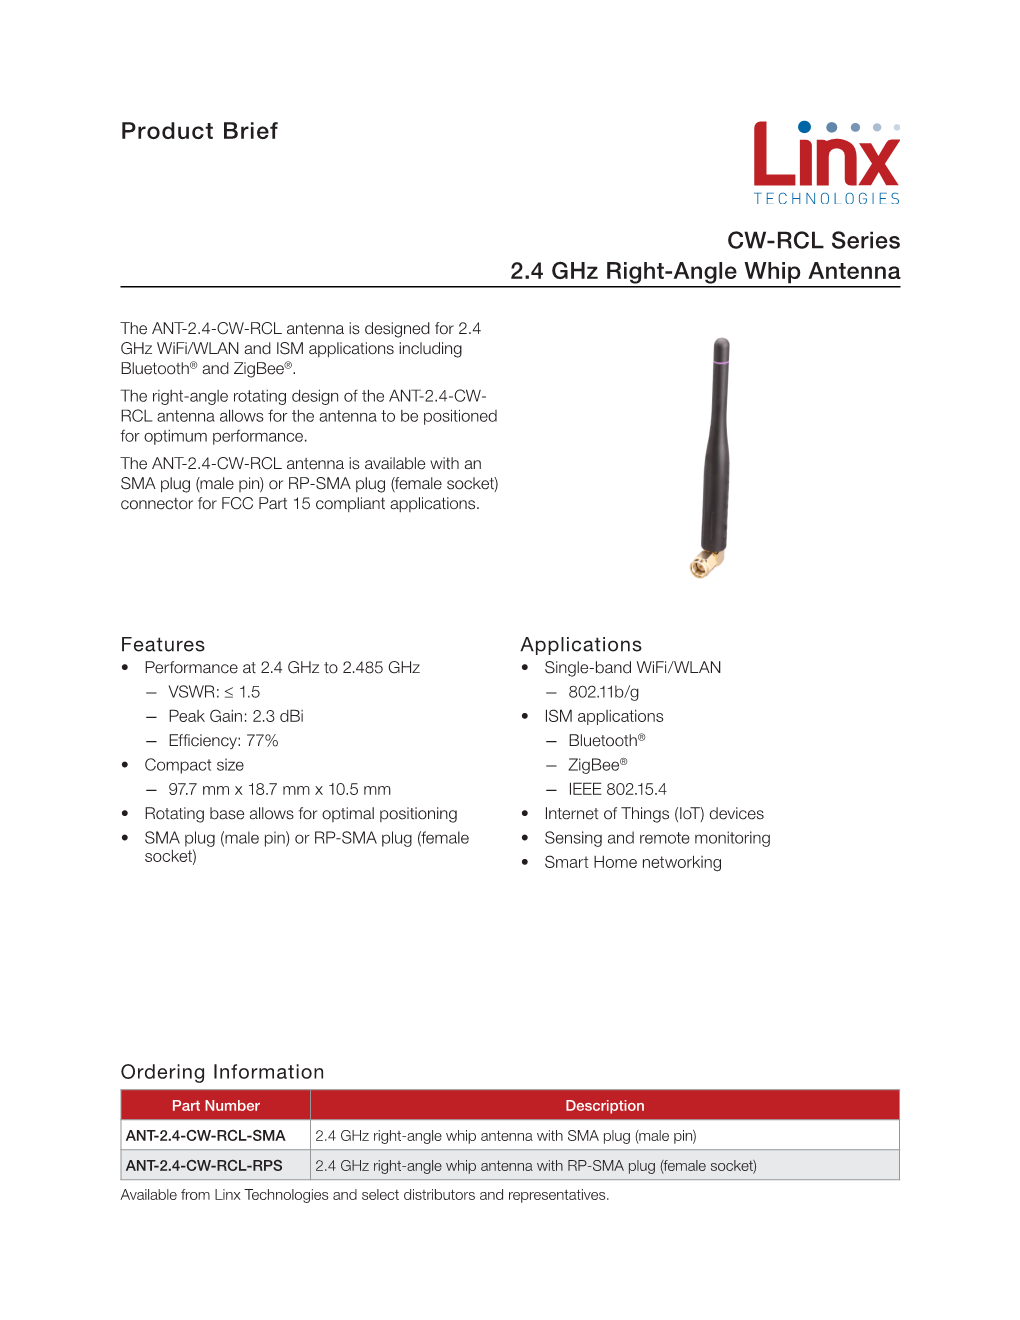 Product Brief CW-RCL Series 2.4 Ghz Right-Angle Whip Antenna